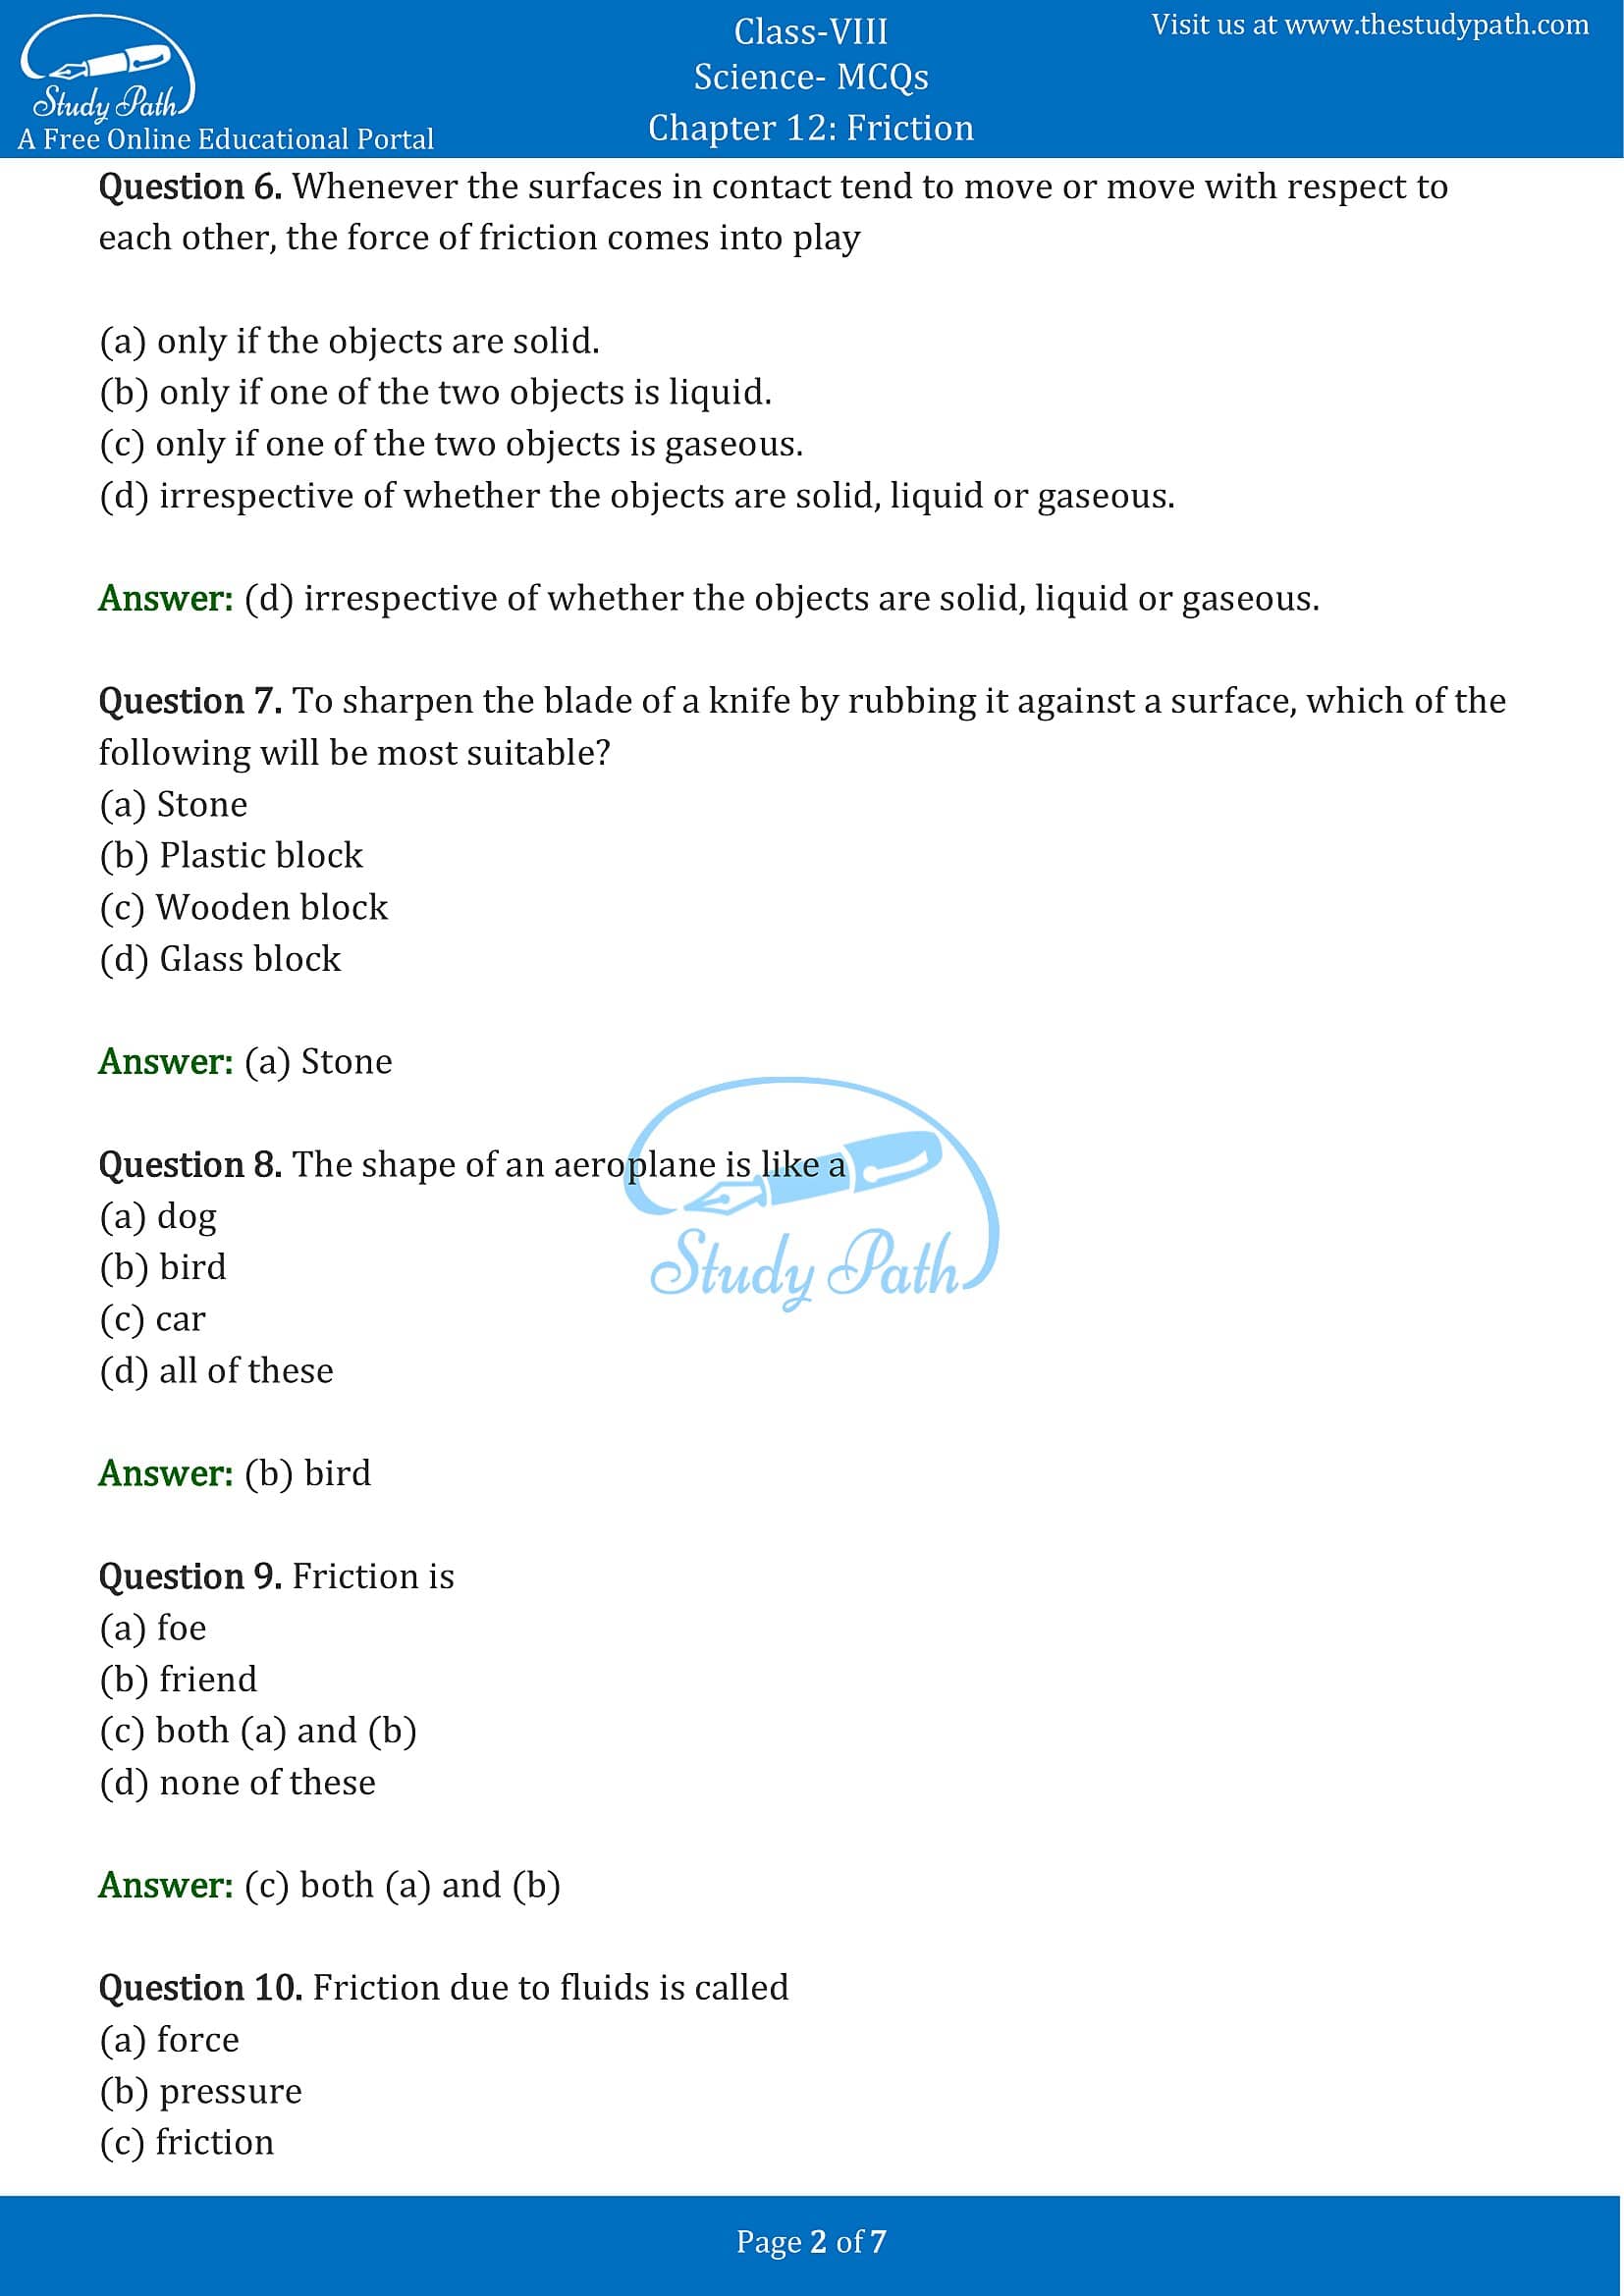 MCQ Questions for Class 8 Science Chapter 12 Friction with Answers PDF -2